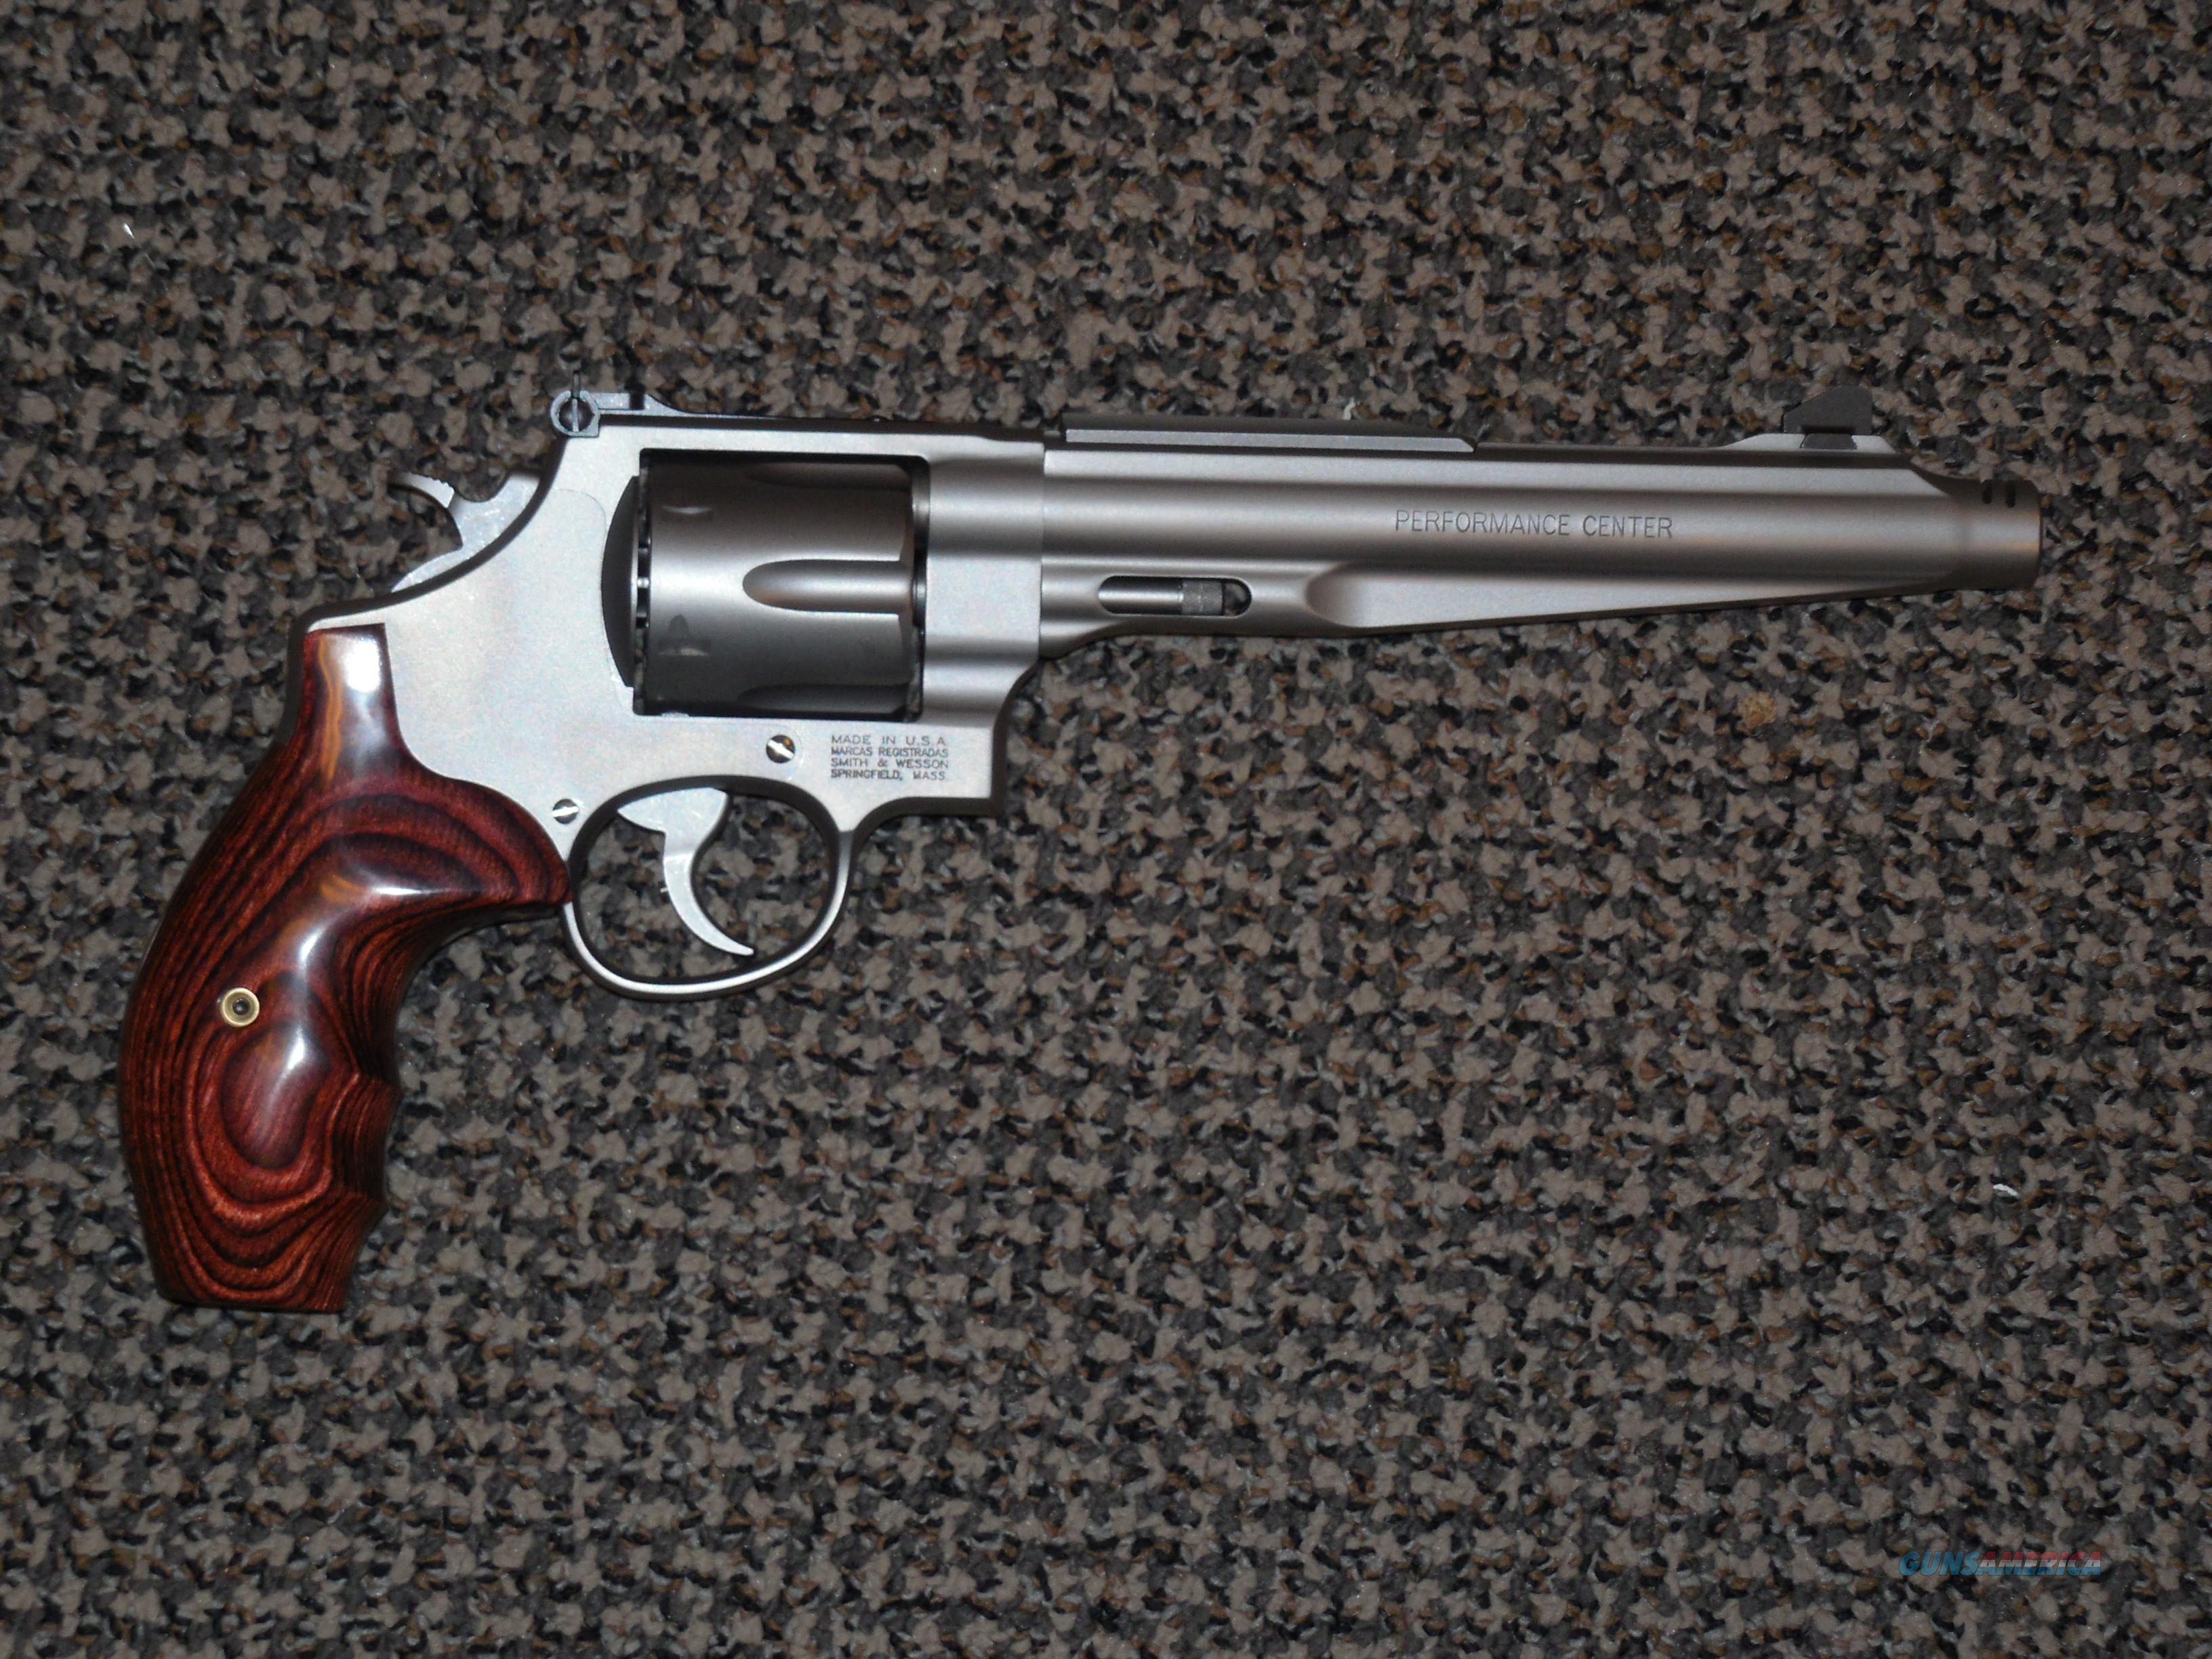 S&W MODEL 629 PC 7-12-INCH COMPENSATED .44 MAGNUM for sale (931218637)